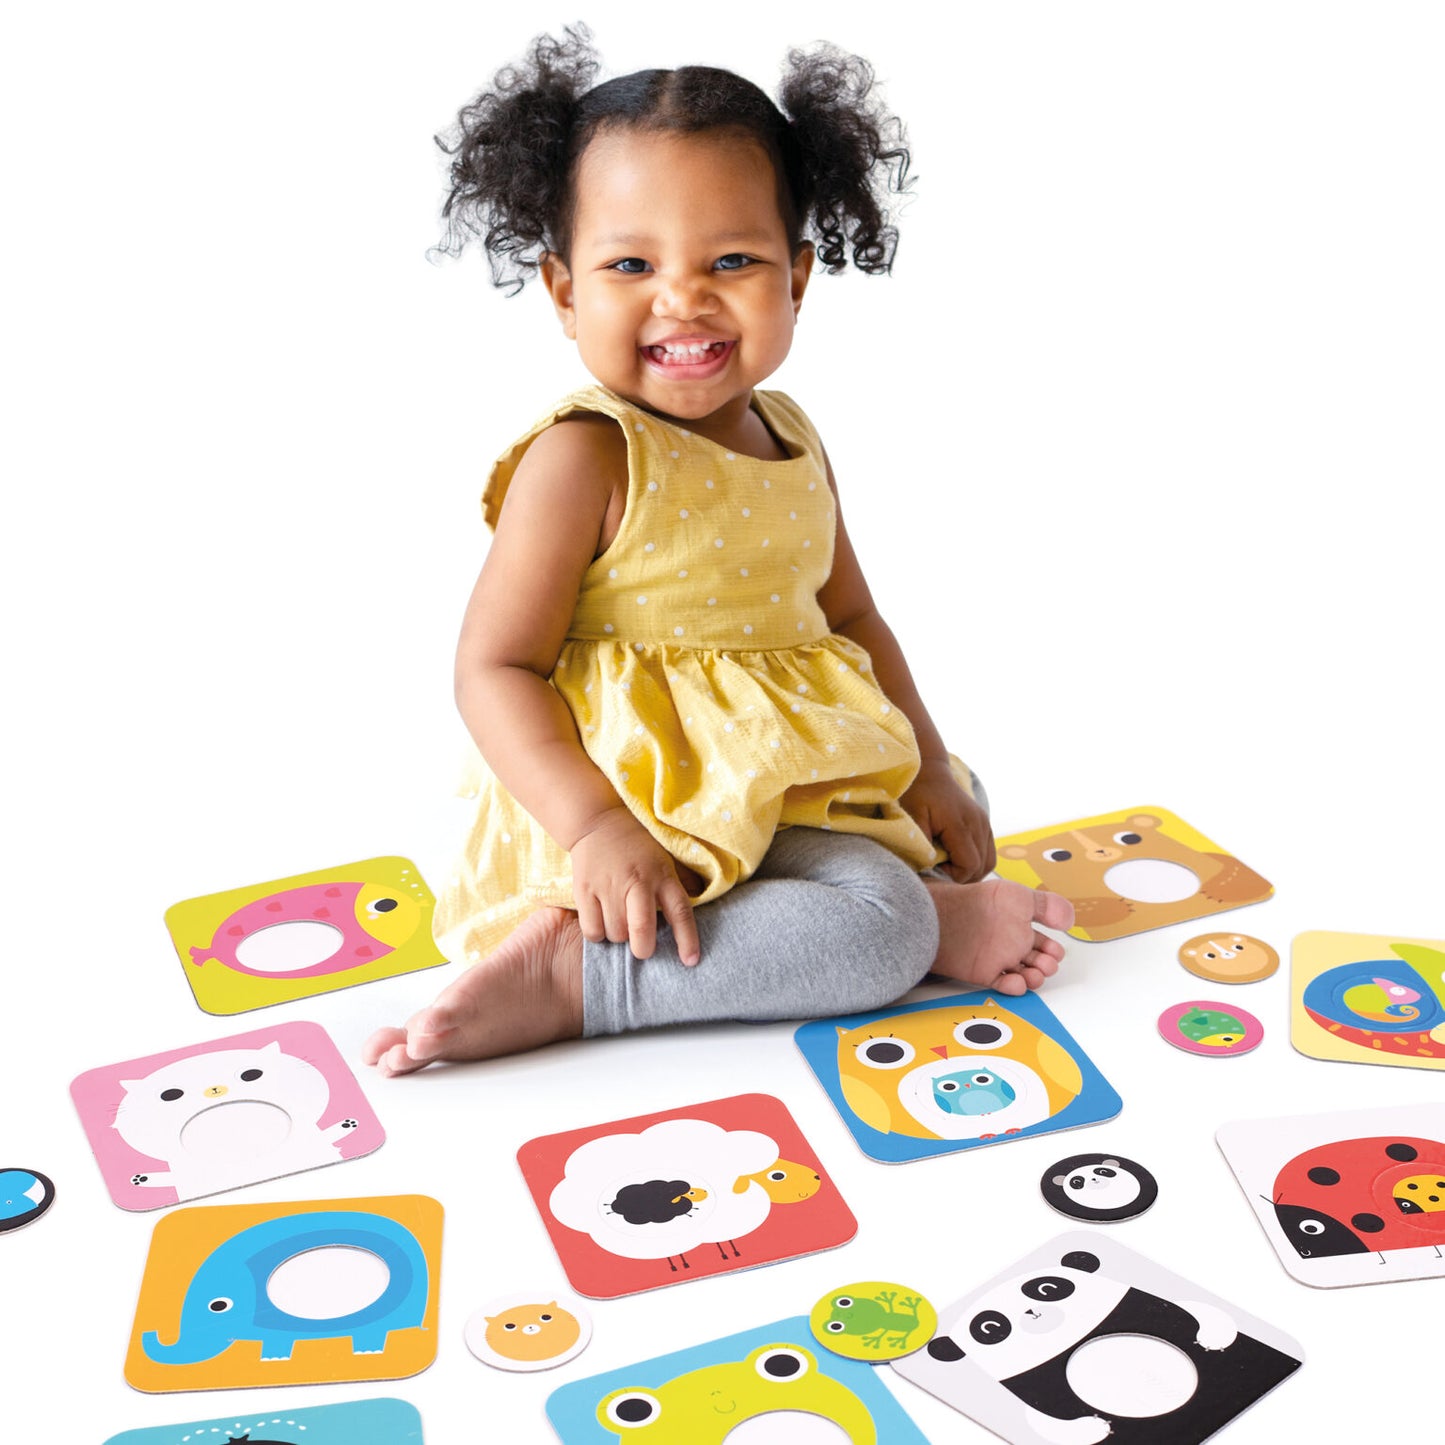 MATCH THE BABY PUZZLES